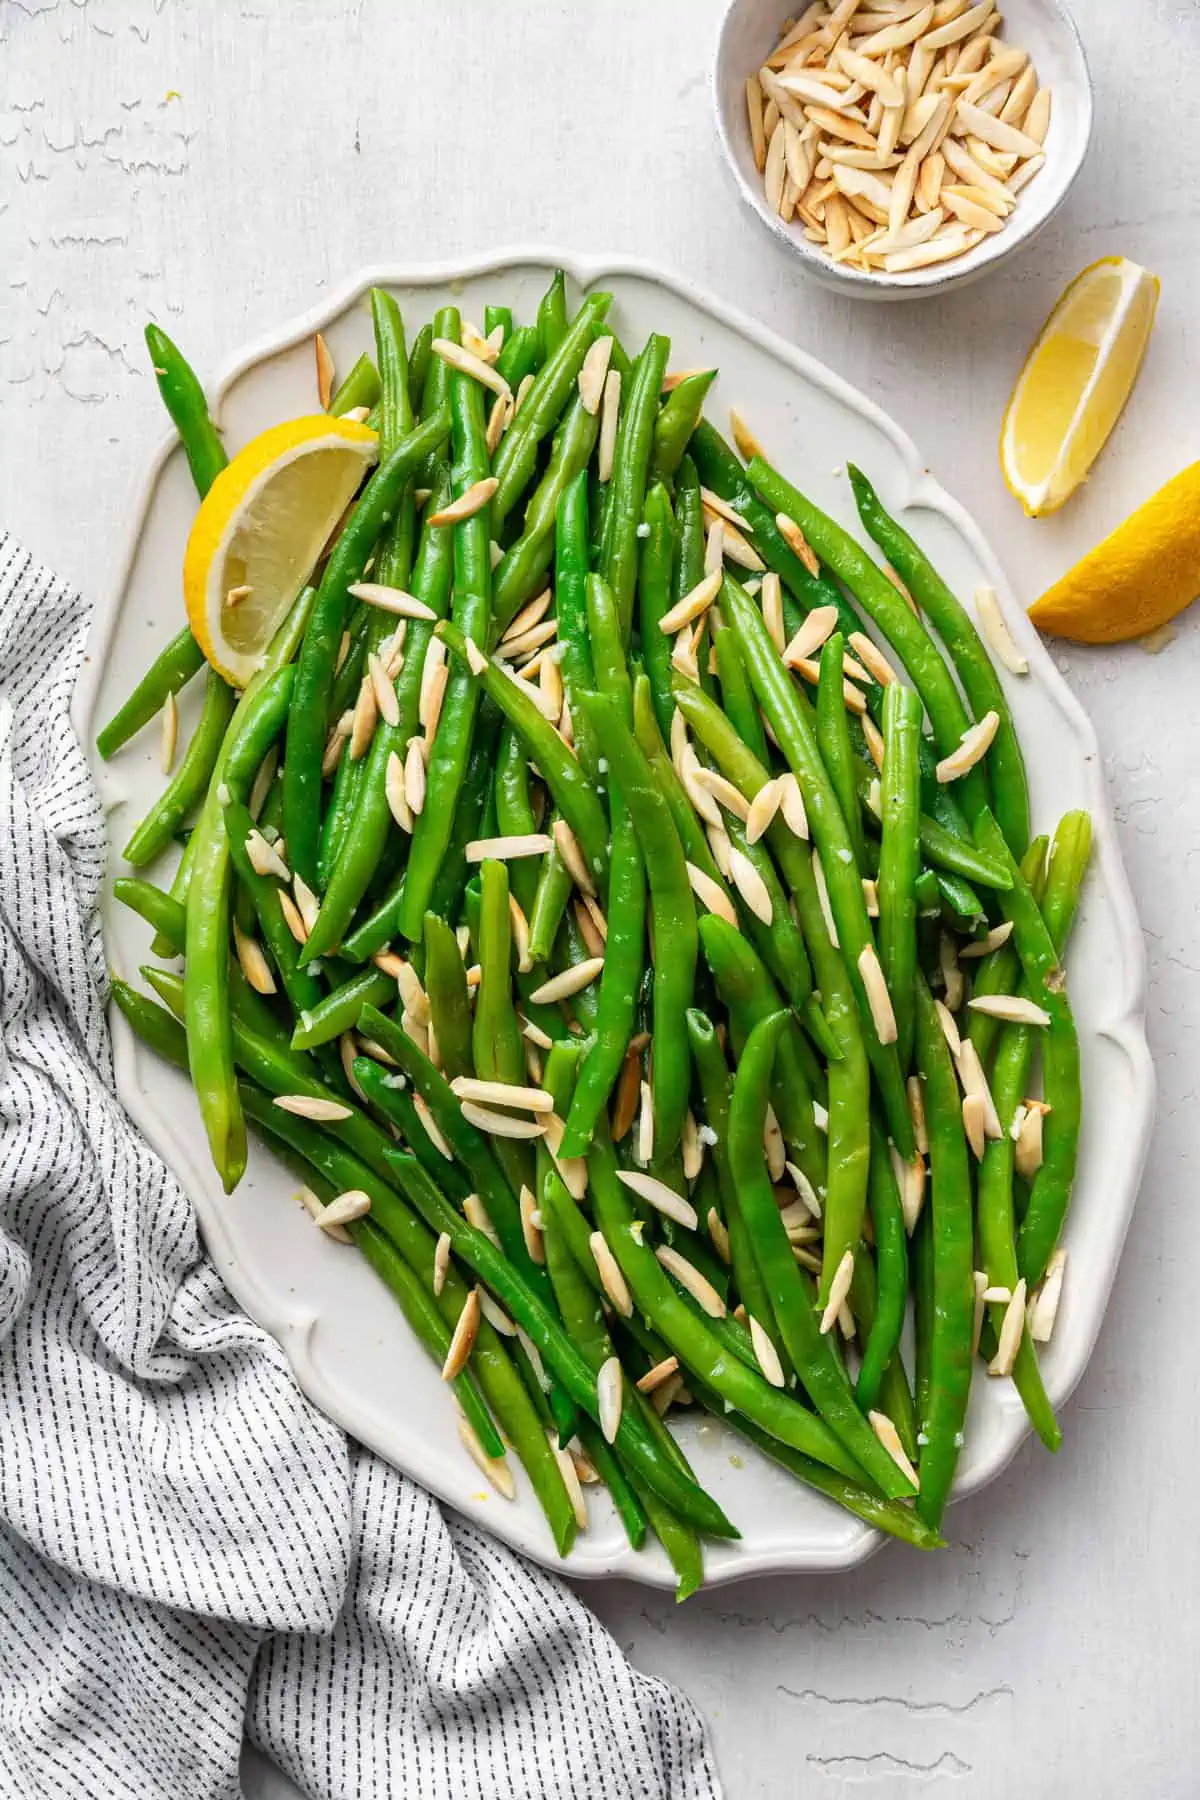 A serving tray of green beans with slivered almonds, with a lemon slice, next to a kitchen towel and two lemon slices